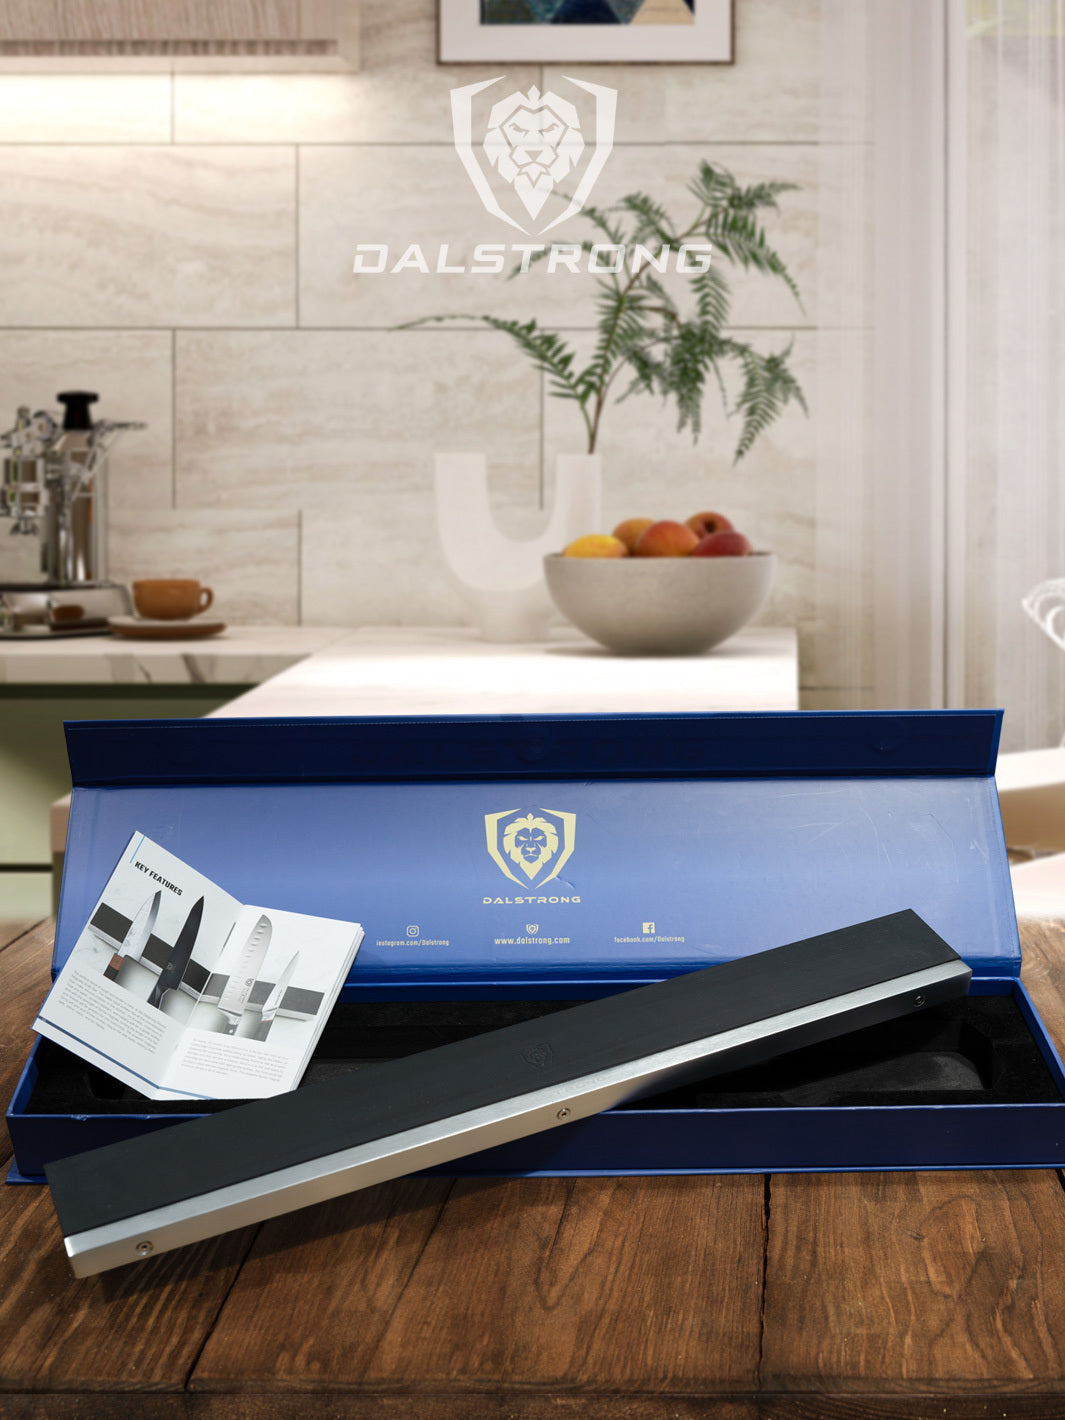 Dalstrong magnetic bar silicone wall knife holder outiside it's premium packaging.